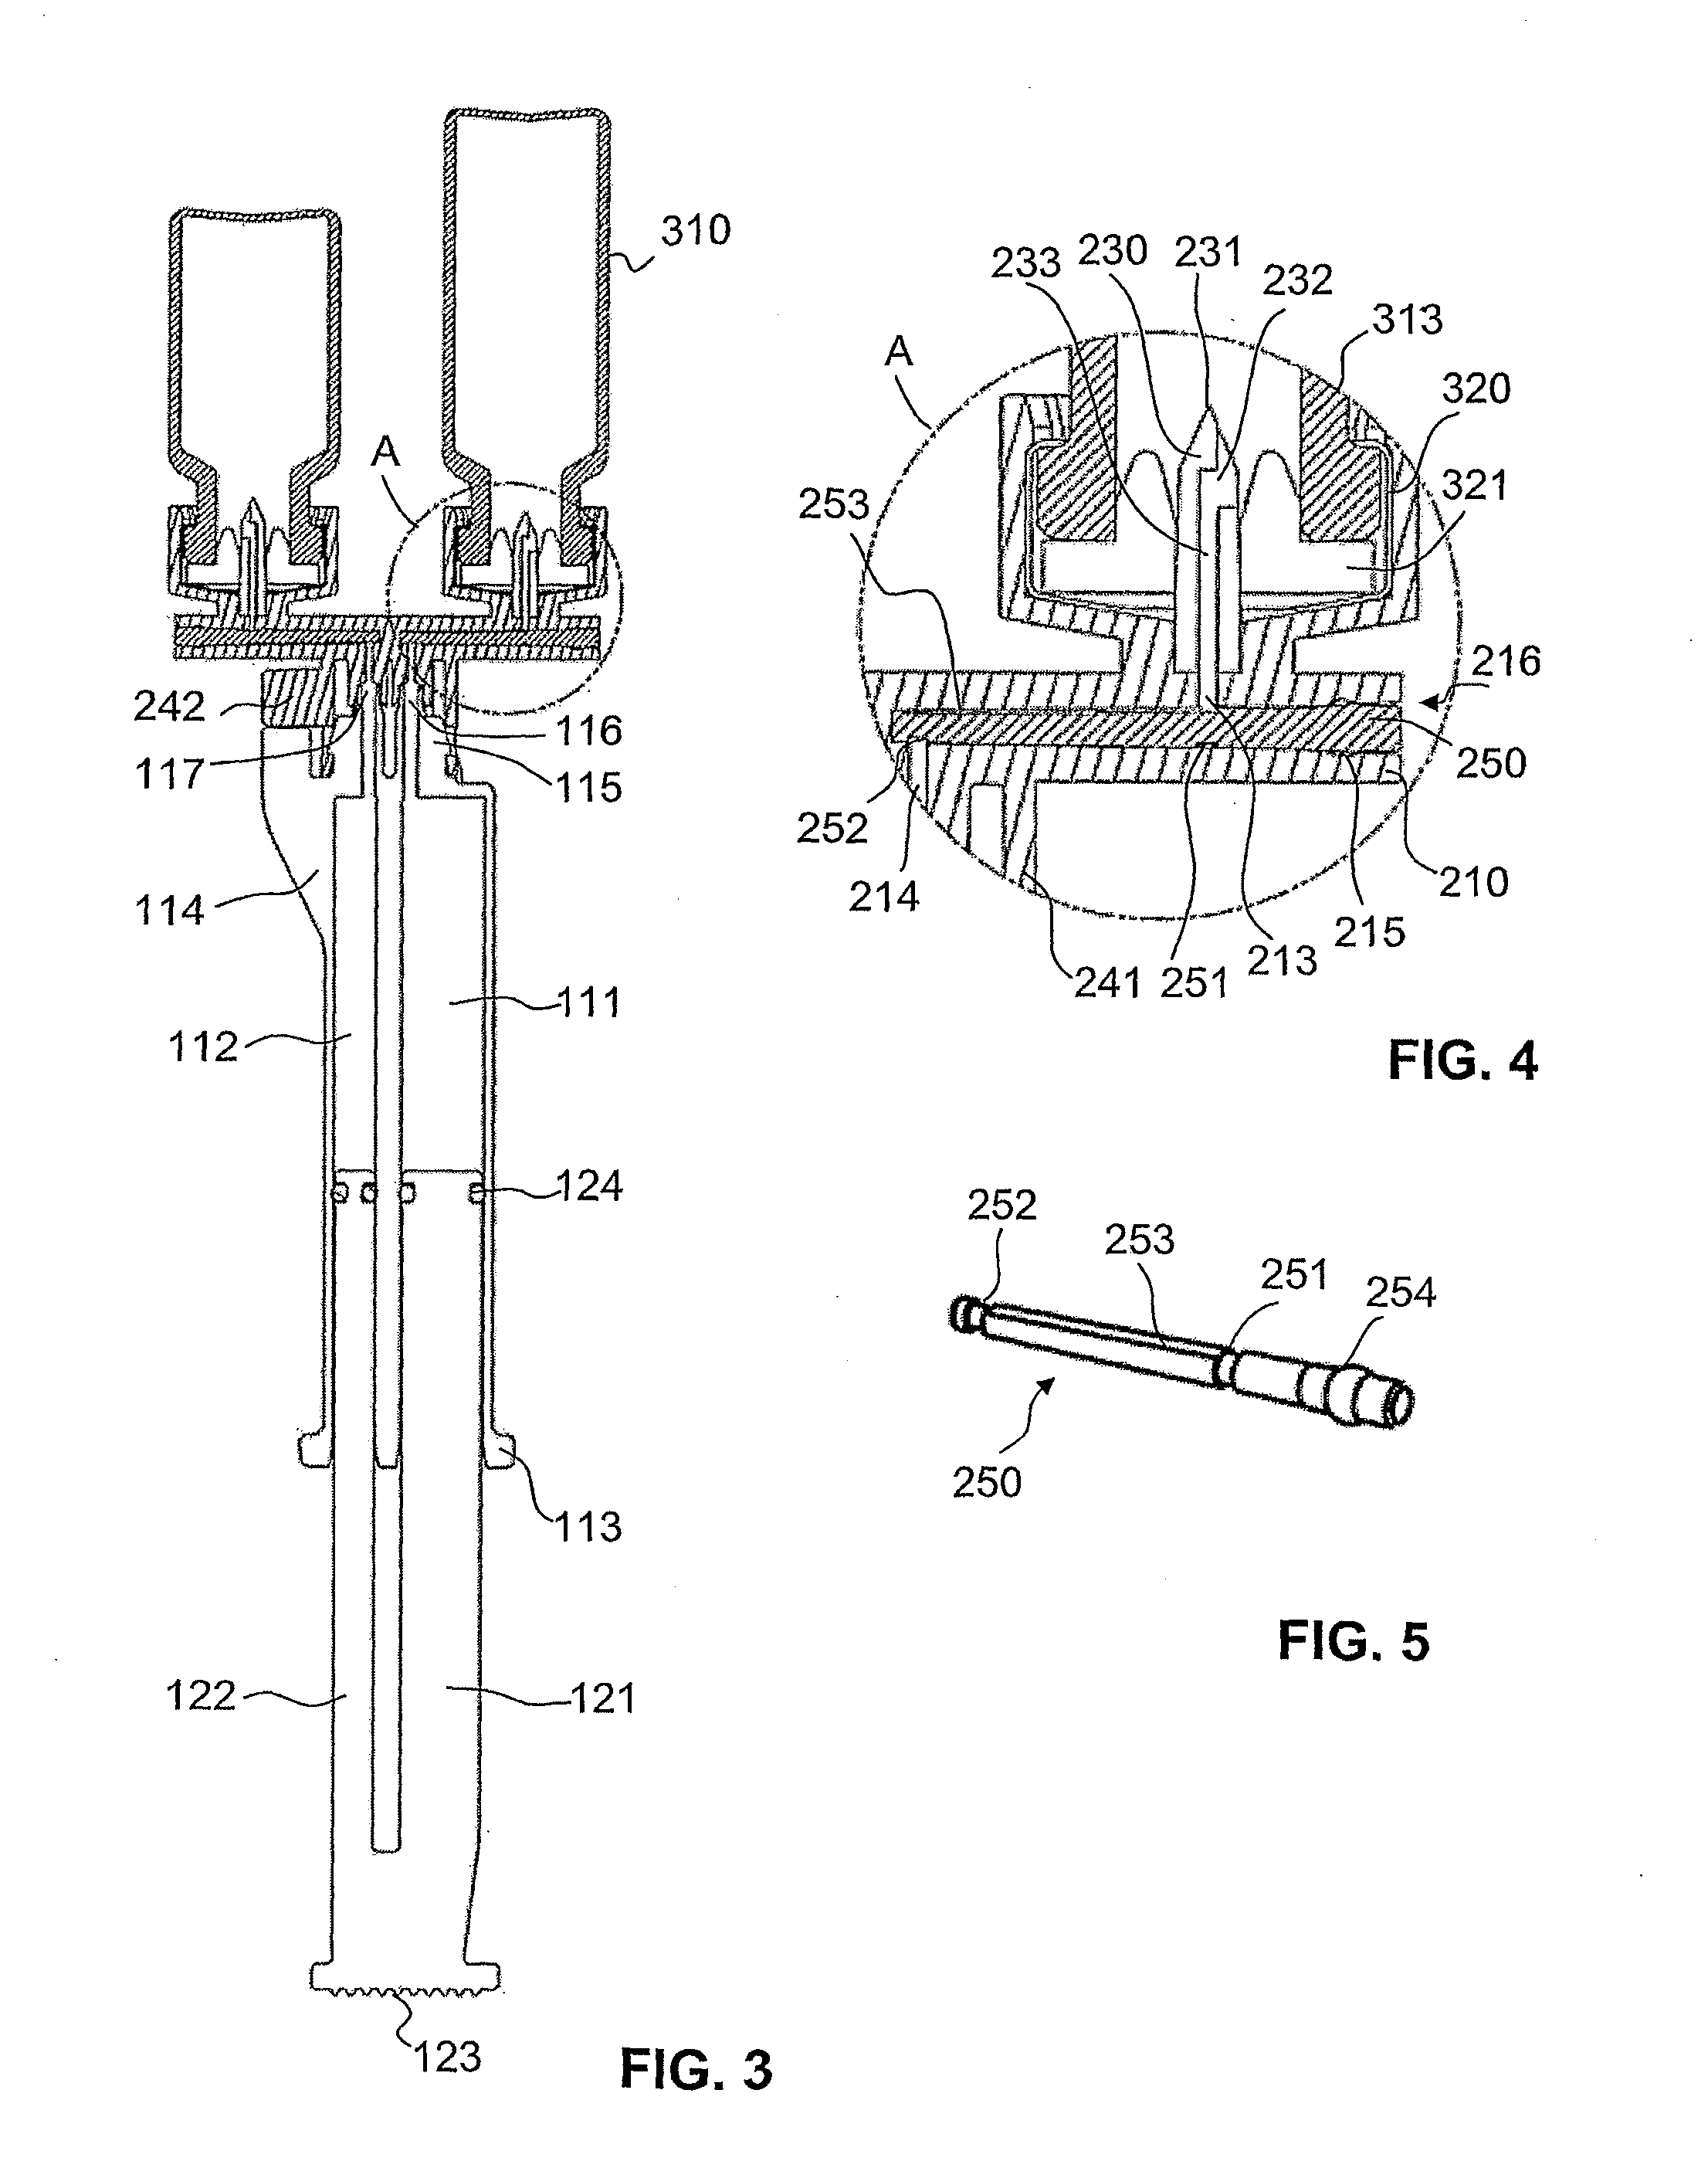 Device for removing a fluid from a vial